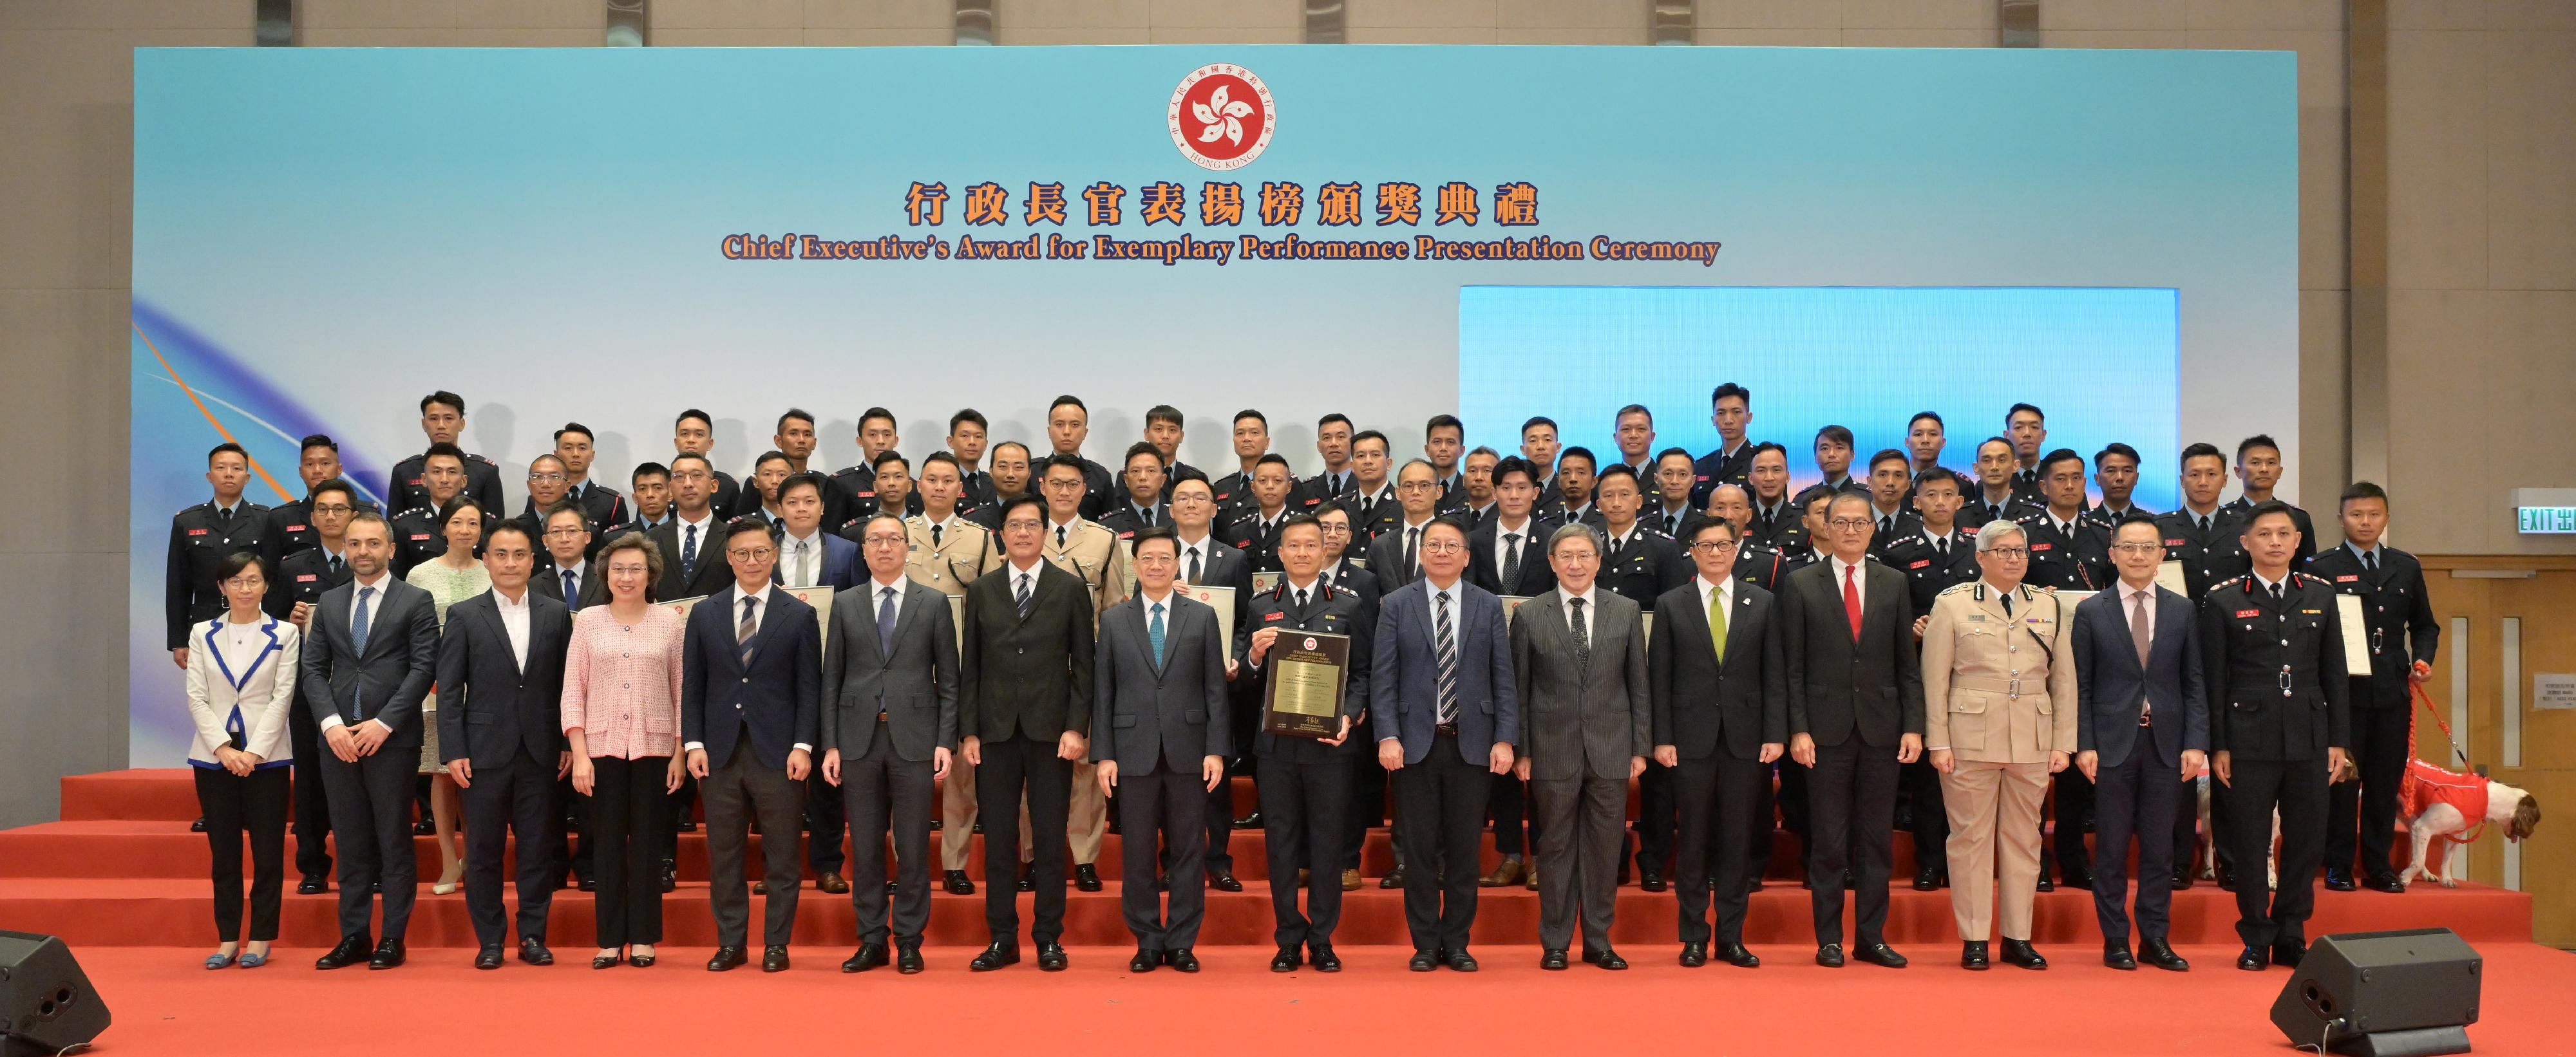 The Chief Executive, Mr John Lee, attended the Chief Executive's Award for Exemplary Performance Presentation Ceremony today (July 13). Photo shows (front row, from first left) the Chairman of the Public Service Commission, Ms Maisie Cheng; the Consul General of Türkiye in Hong Kong, Mr Peyami Kalyoncu; the Chairman of the Legislative Council's Panel on Public Service, Mr Kwok Wai-keung; the Secretary for the Civil Service, Mrs Ingrid Yeung; the Deputy Secretary for Justice, Mr Cheung Kwok-kwan; the Secretary for Justice, Mr Paul Lam, SC; the Acting Financial Secretary, Mr Michael Wong; Mr Lee; the Commander of the Hong Kong Special Administrative Region (HKSAR) search and rescue team deployed to quake-stricken areas of Türkiye in 2023, Mr Yiu Men-yeung; the Chief Secretary for Administration, Mr Chan Kwok-ki; the Deputy Chief Secretary for Administration, Mr Cheuk Wing-hing; the Secretary for Security, Mr Tang Ping-keung; the Secretary for Health, Professor Lo Chung-mau; the Director of Immigration, Mr Au Ka-wang; the Director of Health, Dr Ronald Lam; the Director of Fire Services, Mr Andy Yeung, and the awarded members and rescue dogs of the HKSAR search and rescue team deployed to quake-stricken areas of Türkiye in 2023 at the ceremony.